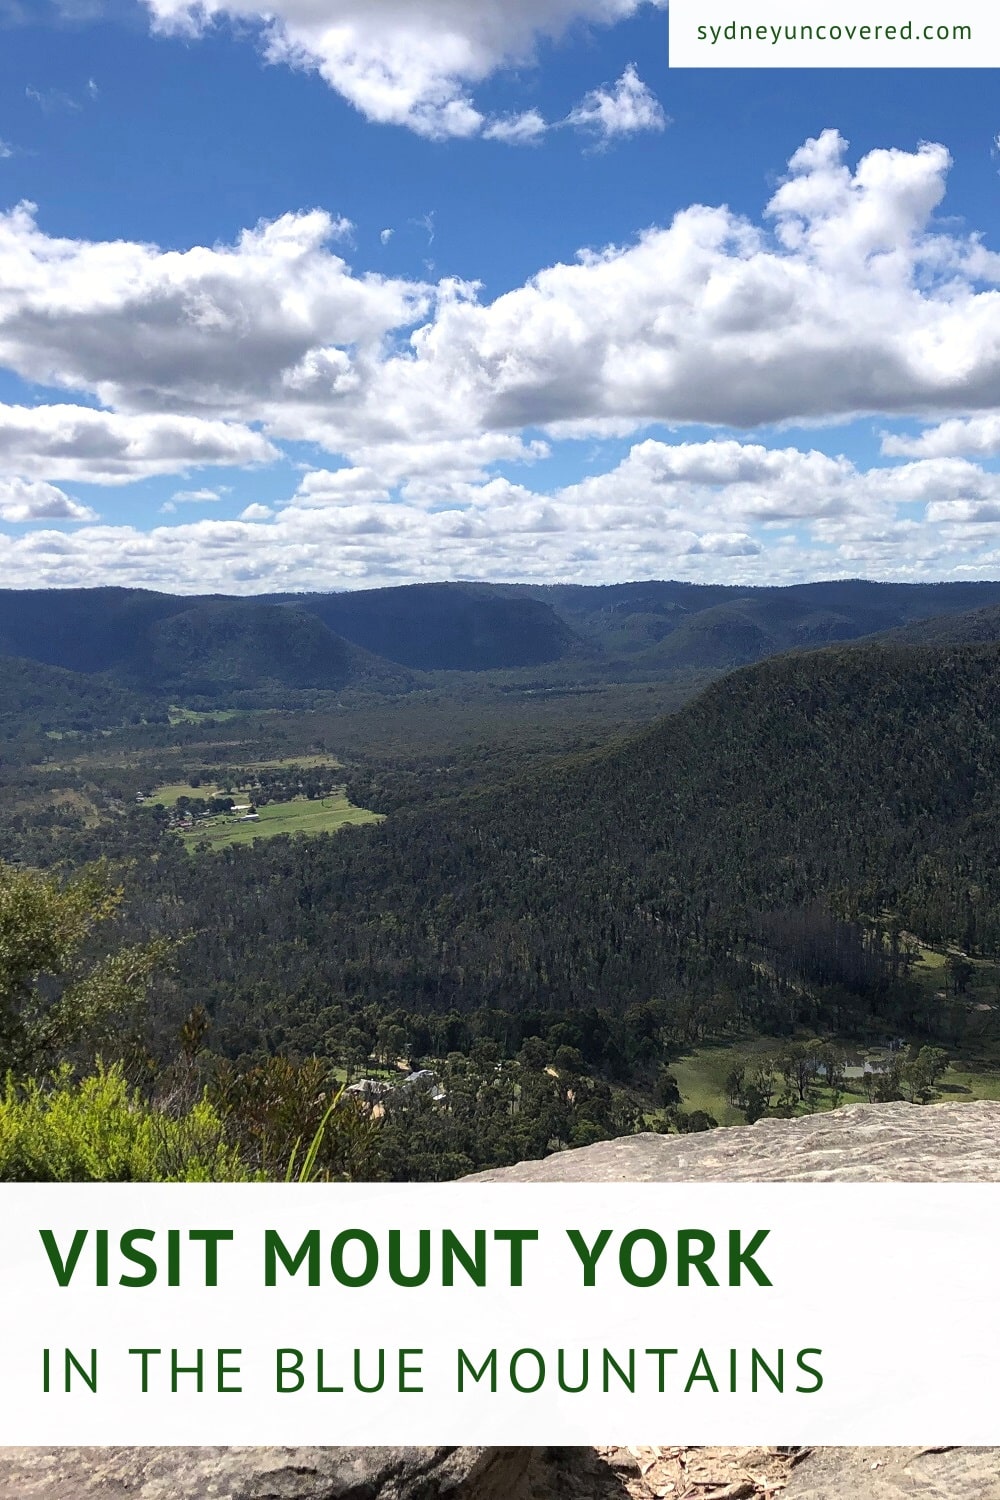 Mount York in the Blue Mountains